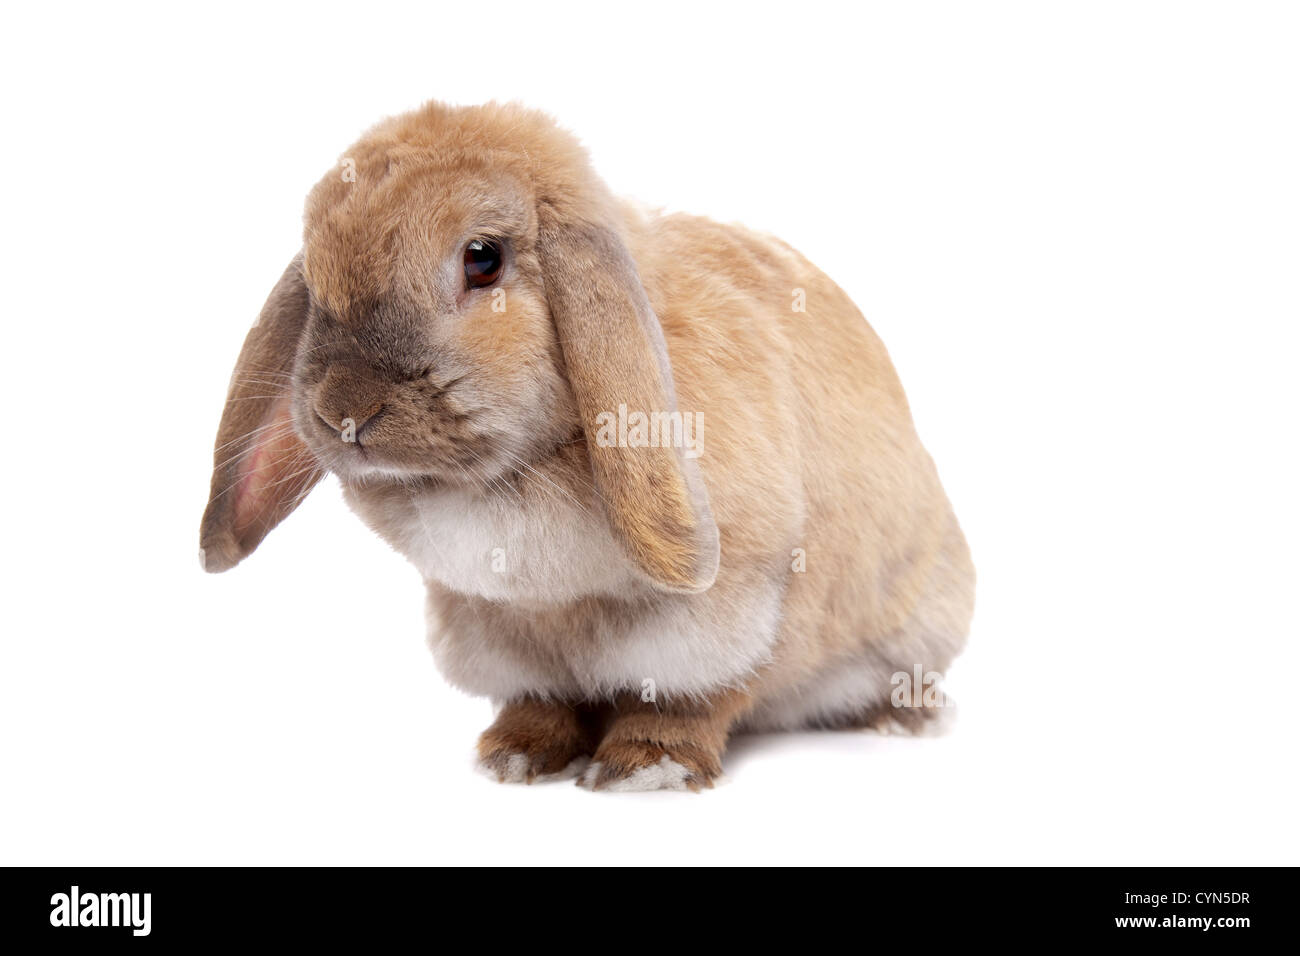 Young brown rabbit in front of a white background Stock Photo